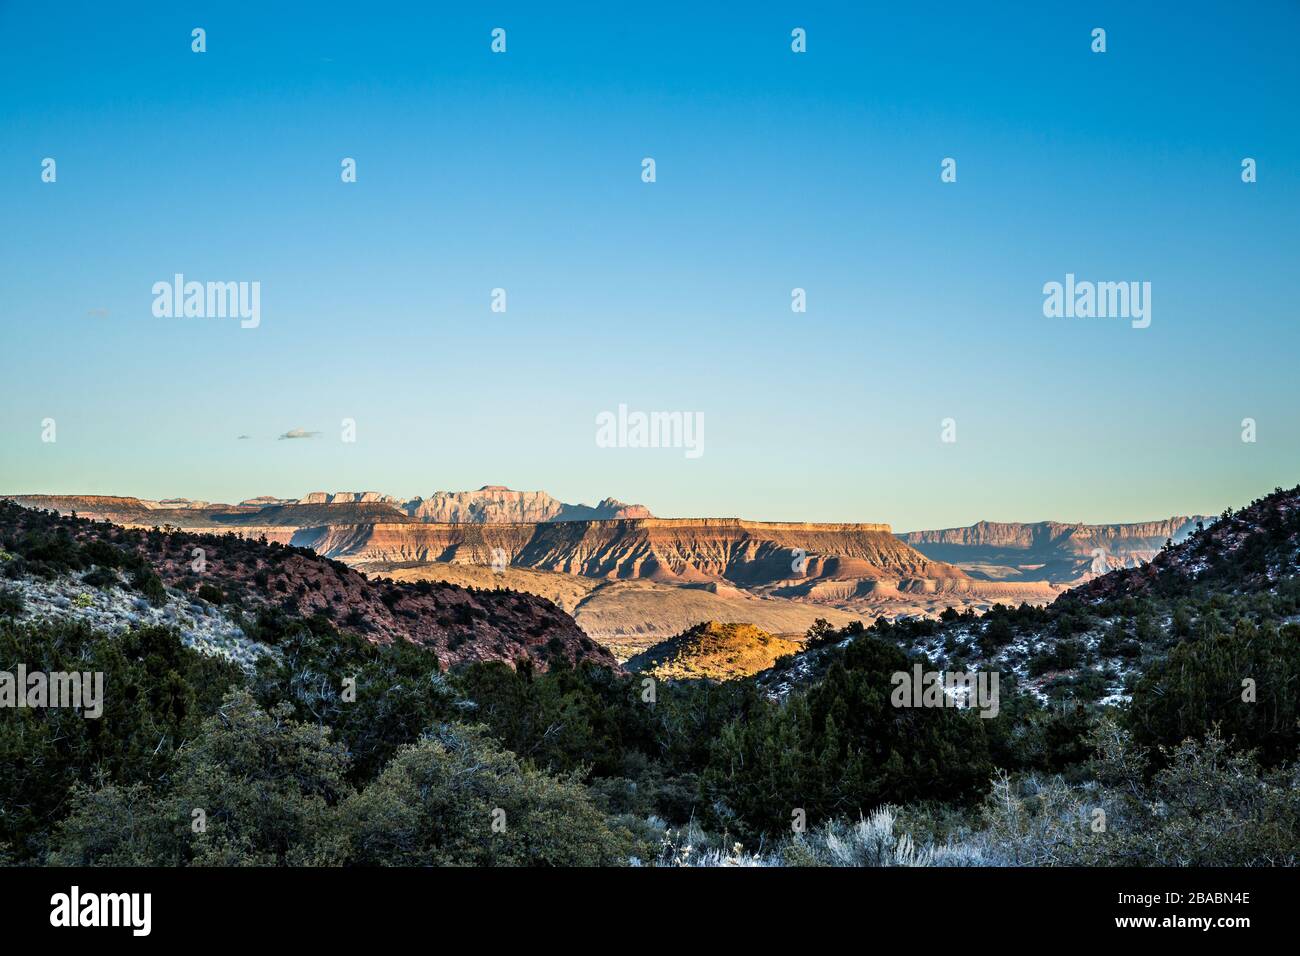 Looking out from the snow covered Pine Valley Mountains in Southern Utah. The skyline of Zion National Park and its steep sandstone formations are jus Stock Photo